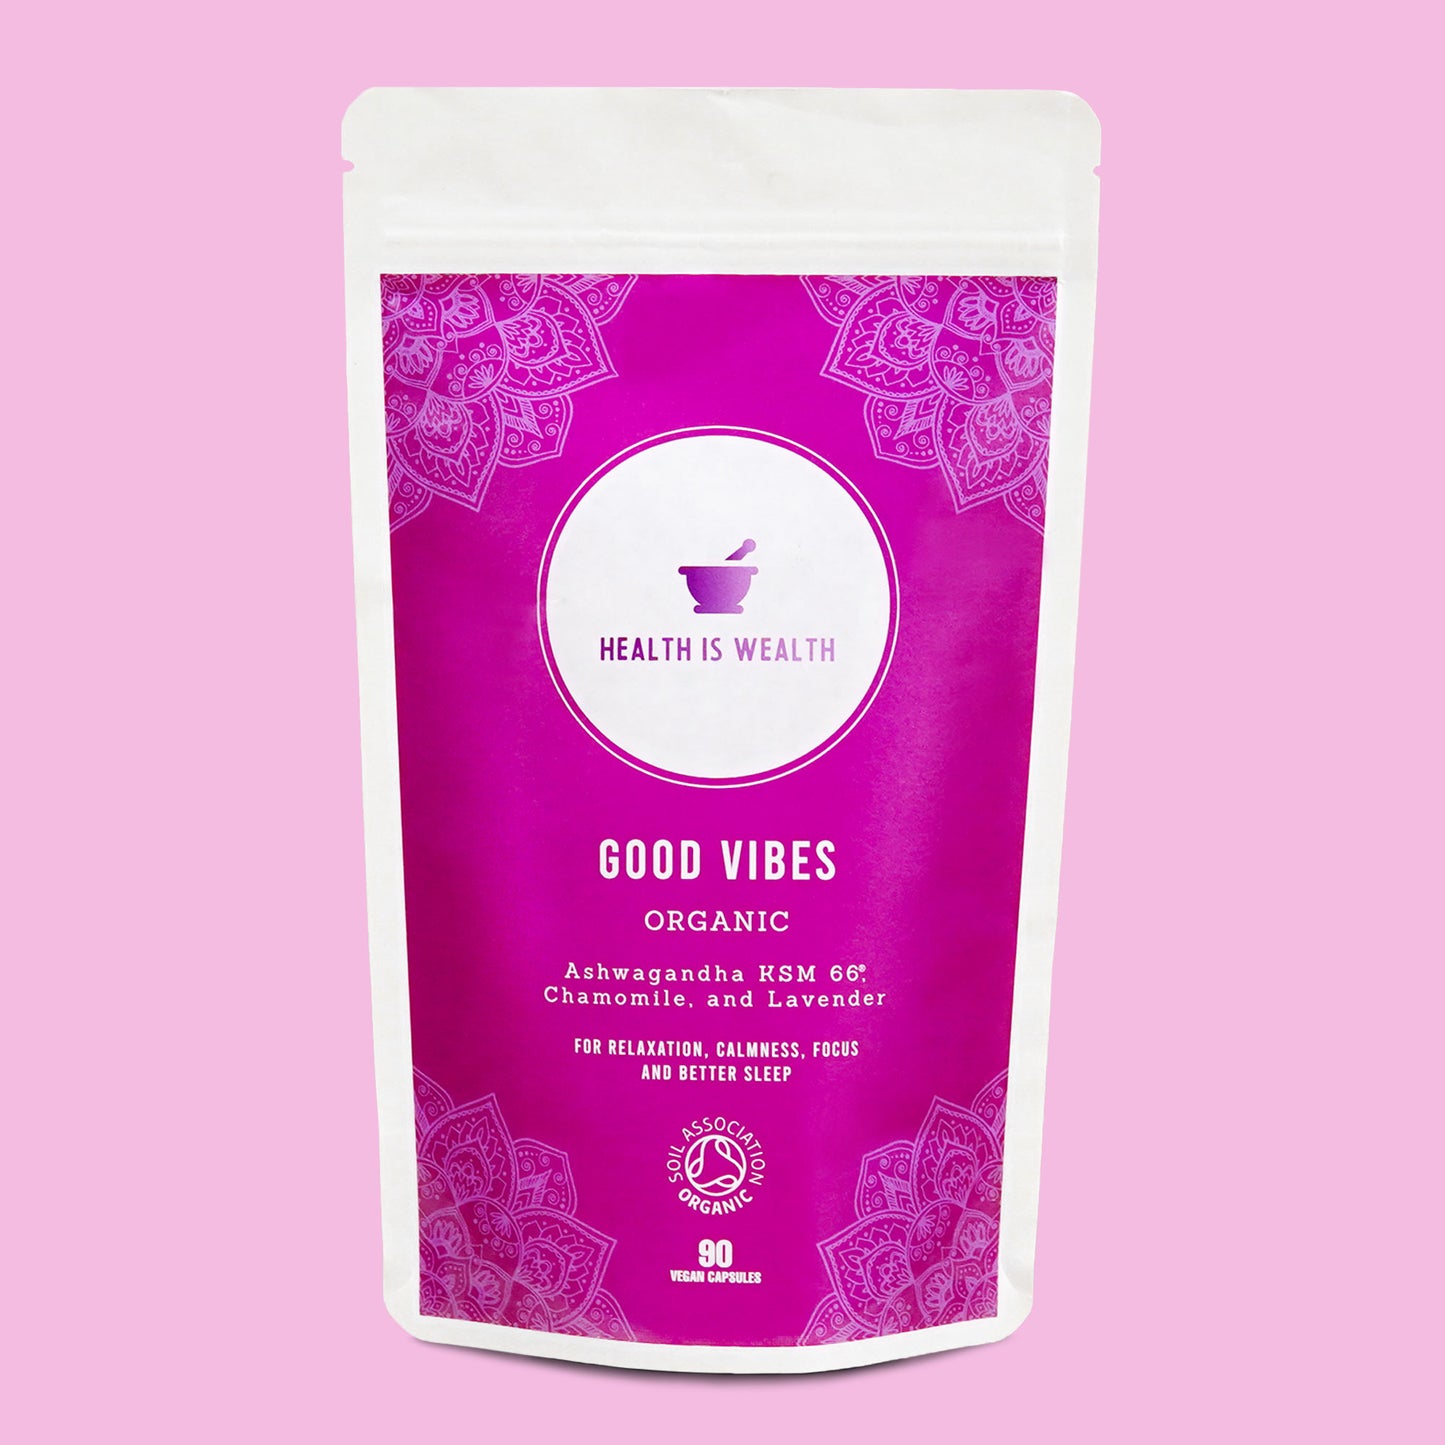 The image showcases the "GOOD VIBES" supplement by Health is Wealth, an organic and natural stress relief supplement. The vibrant purple packaging features intricate mandala patterns and states its contents of Ashwagandha KSM 66, Chamomile, and Lavender, which are advertised to promote relaxation, focus, and better sleep. The pouch indicates a quantity of 90 vegan capsules.